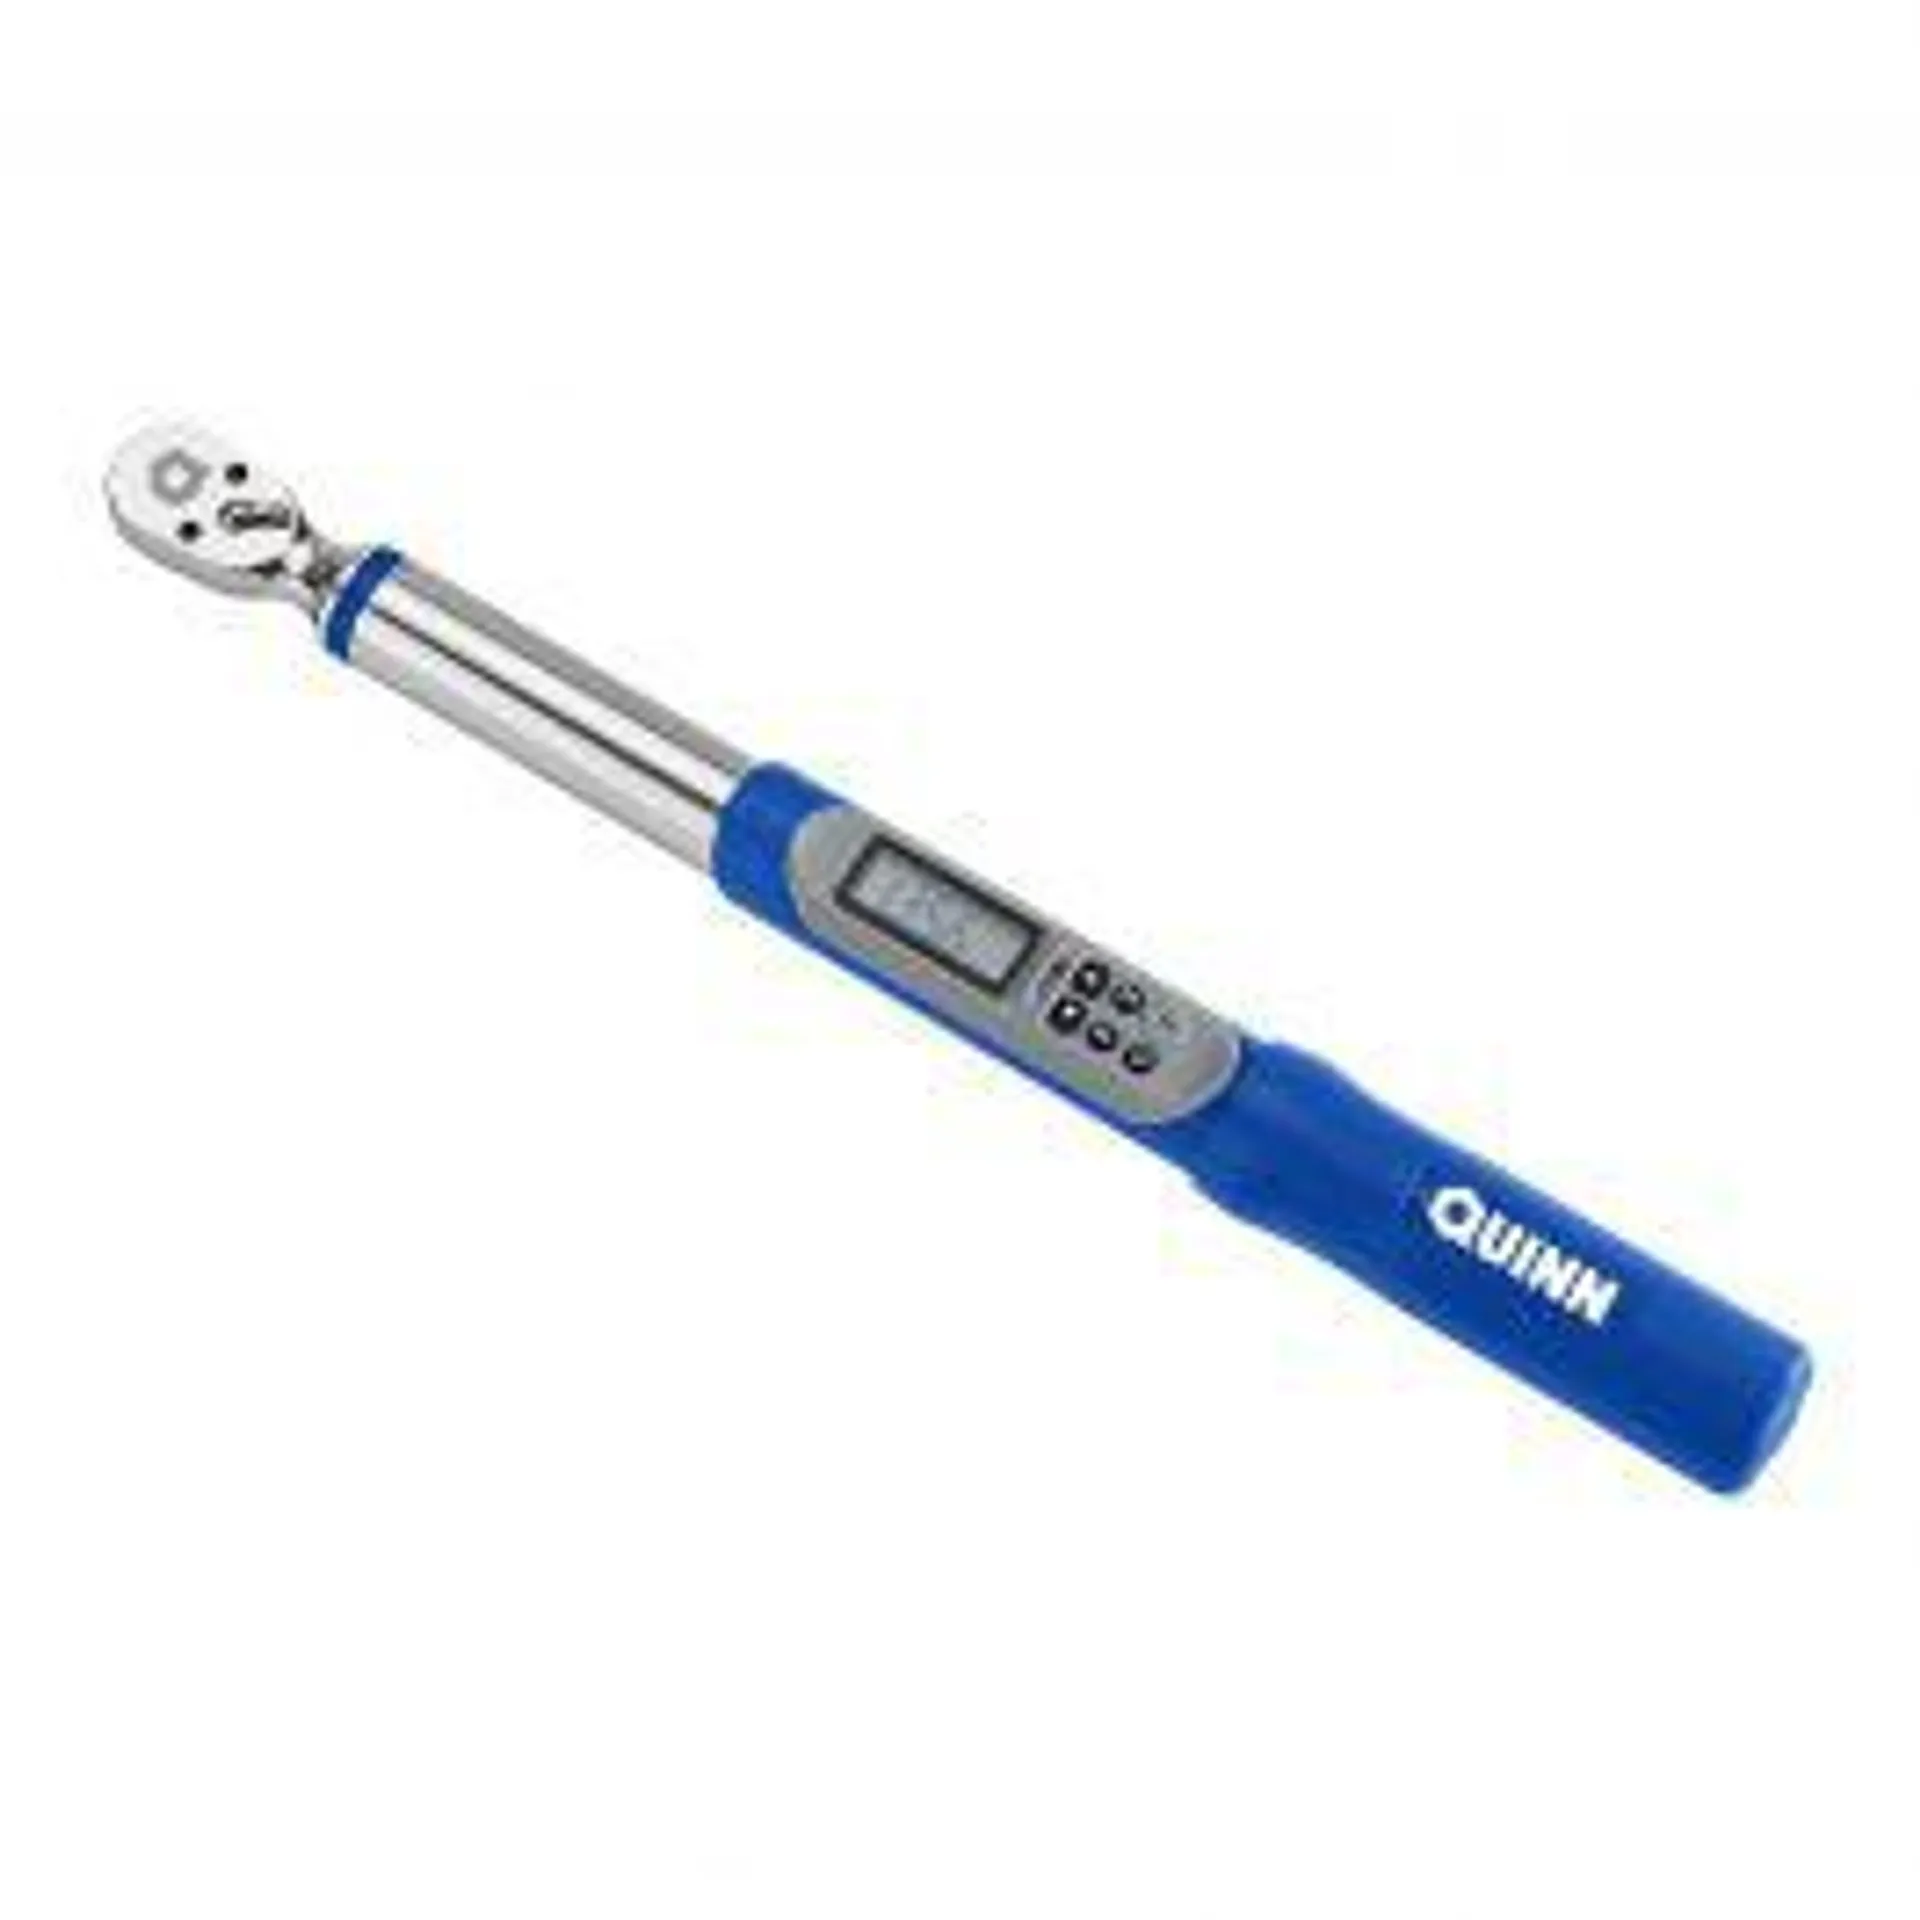 3/8 in. Drive 5-100 ft. lb. Digital Angle Torque Wrench